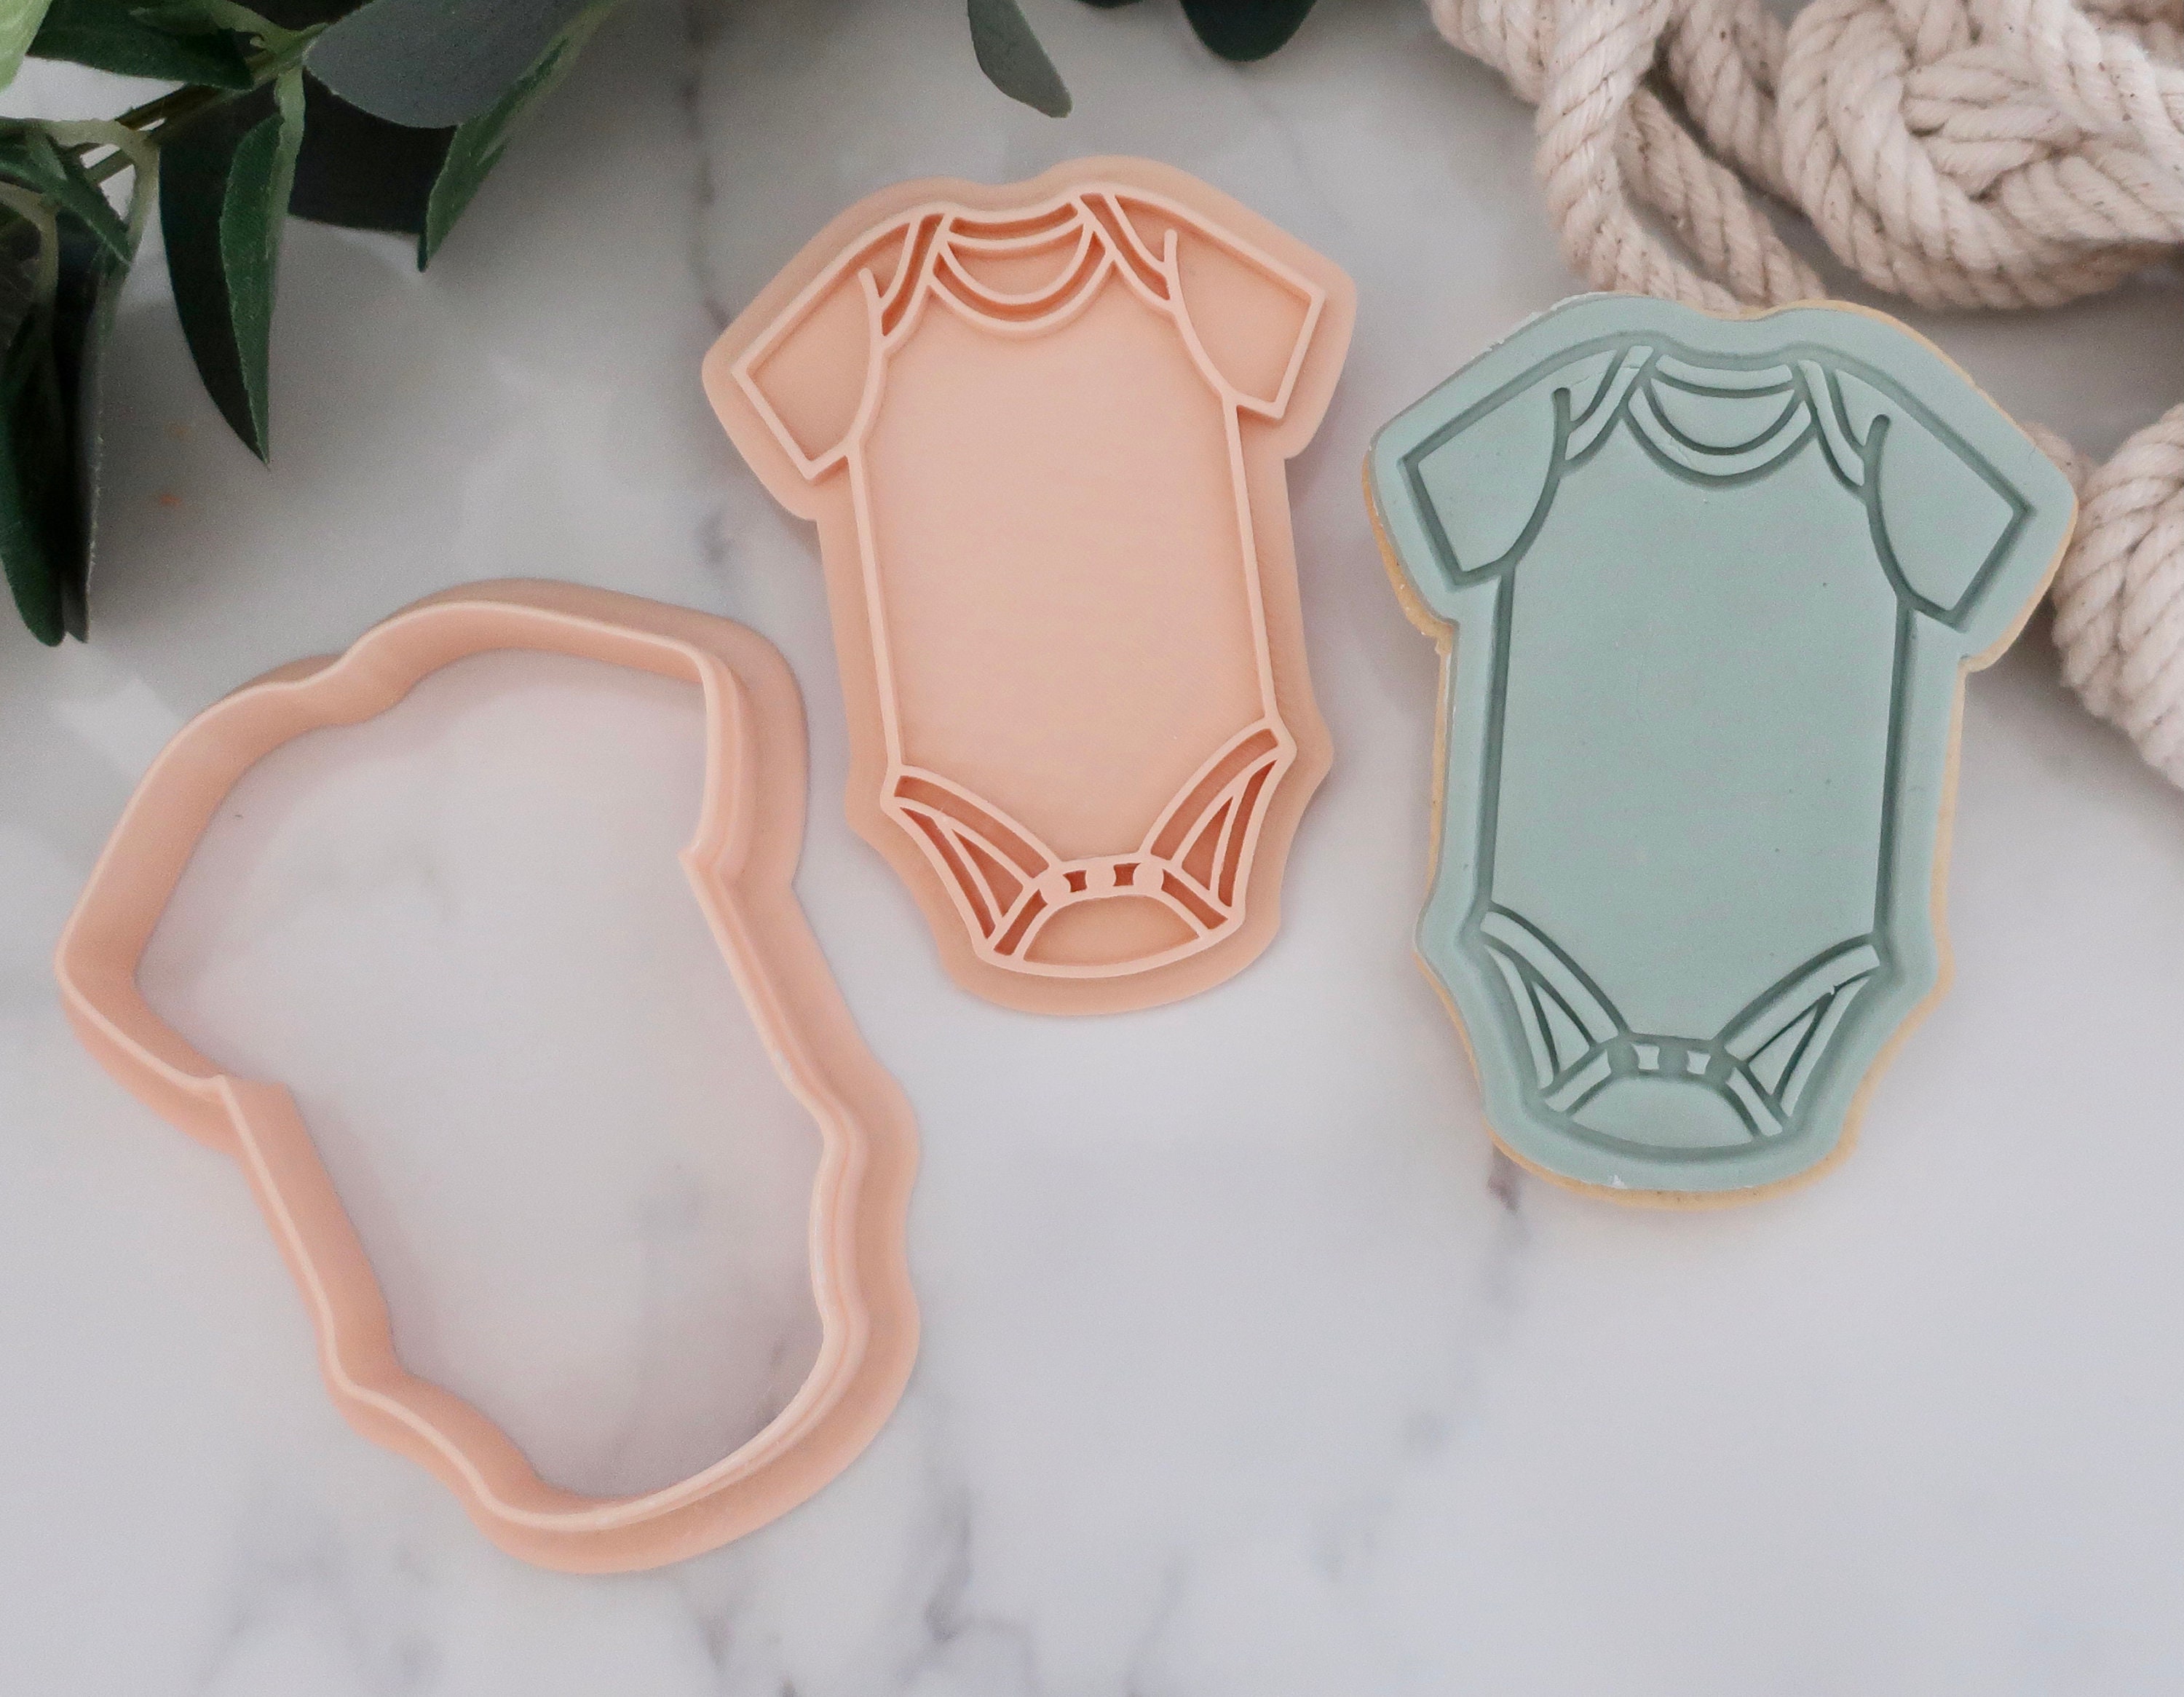 Baby Shower Themed Cookie Cutters With Embosser Stamp